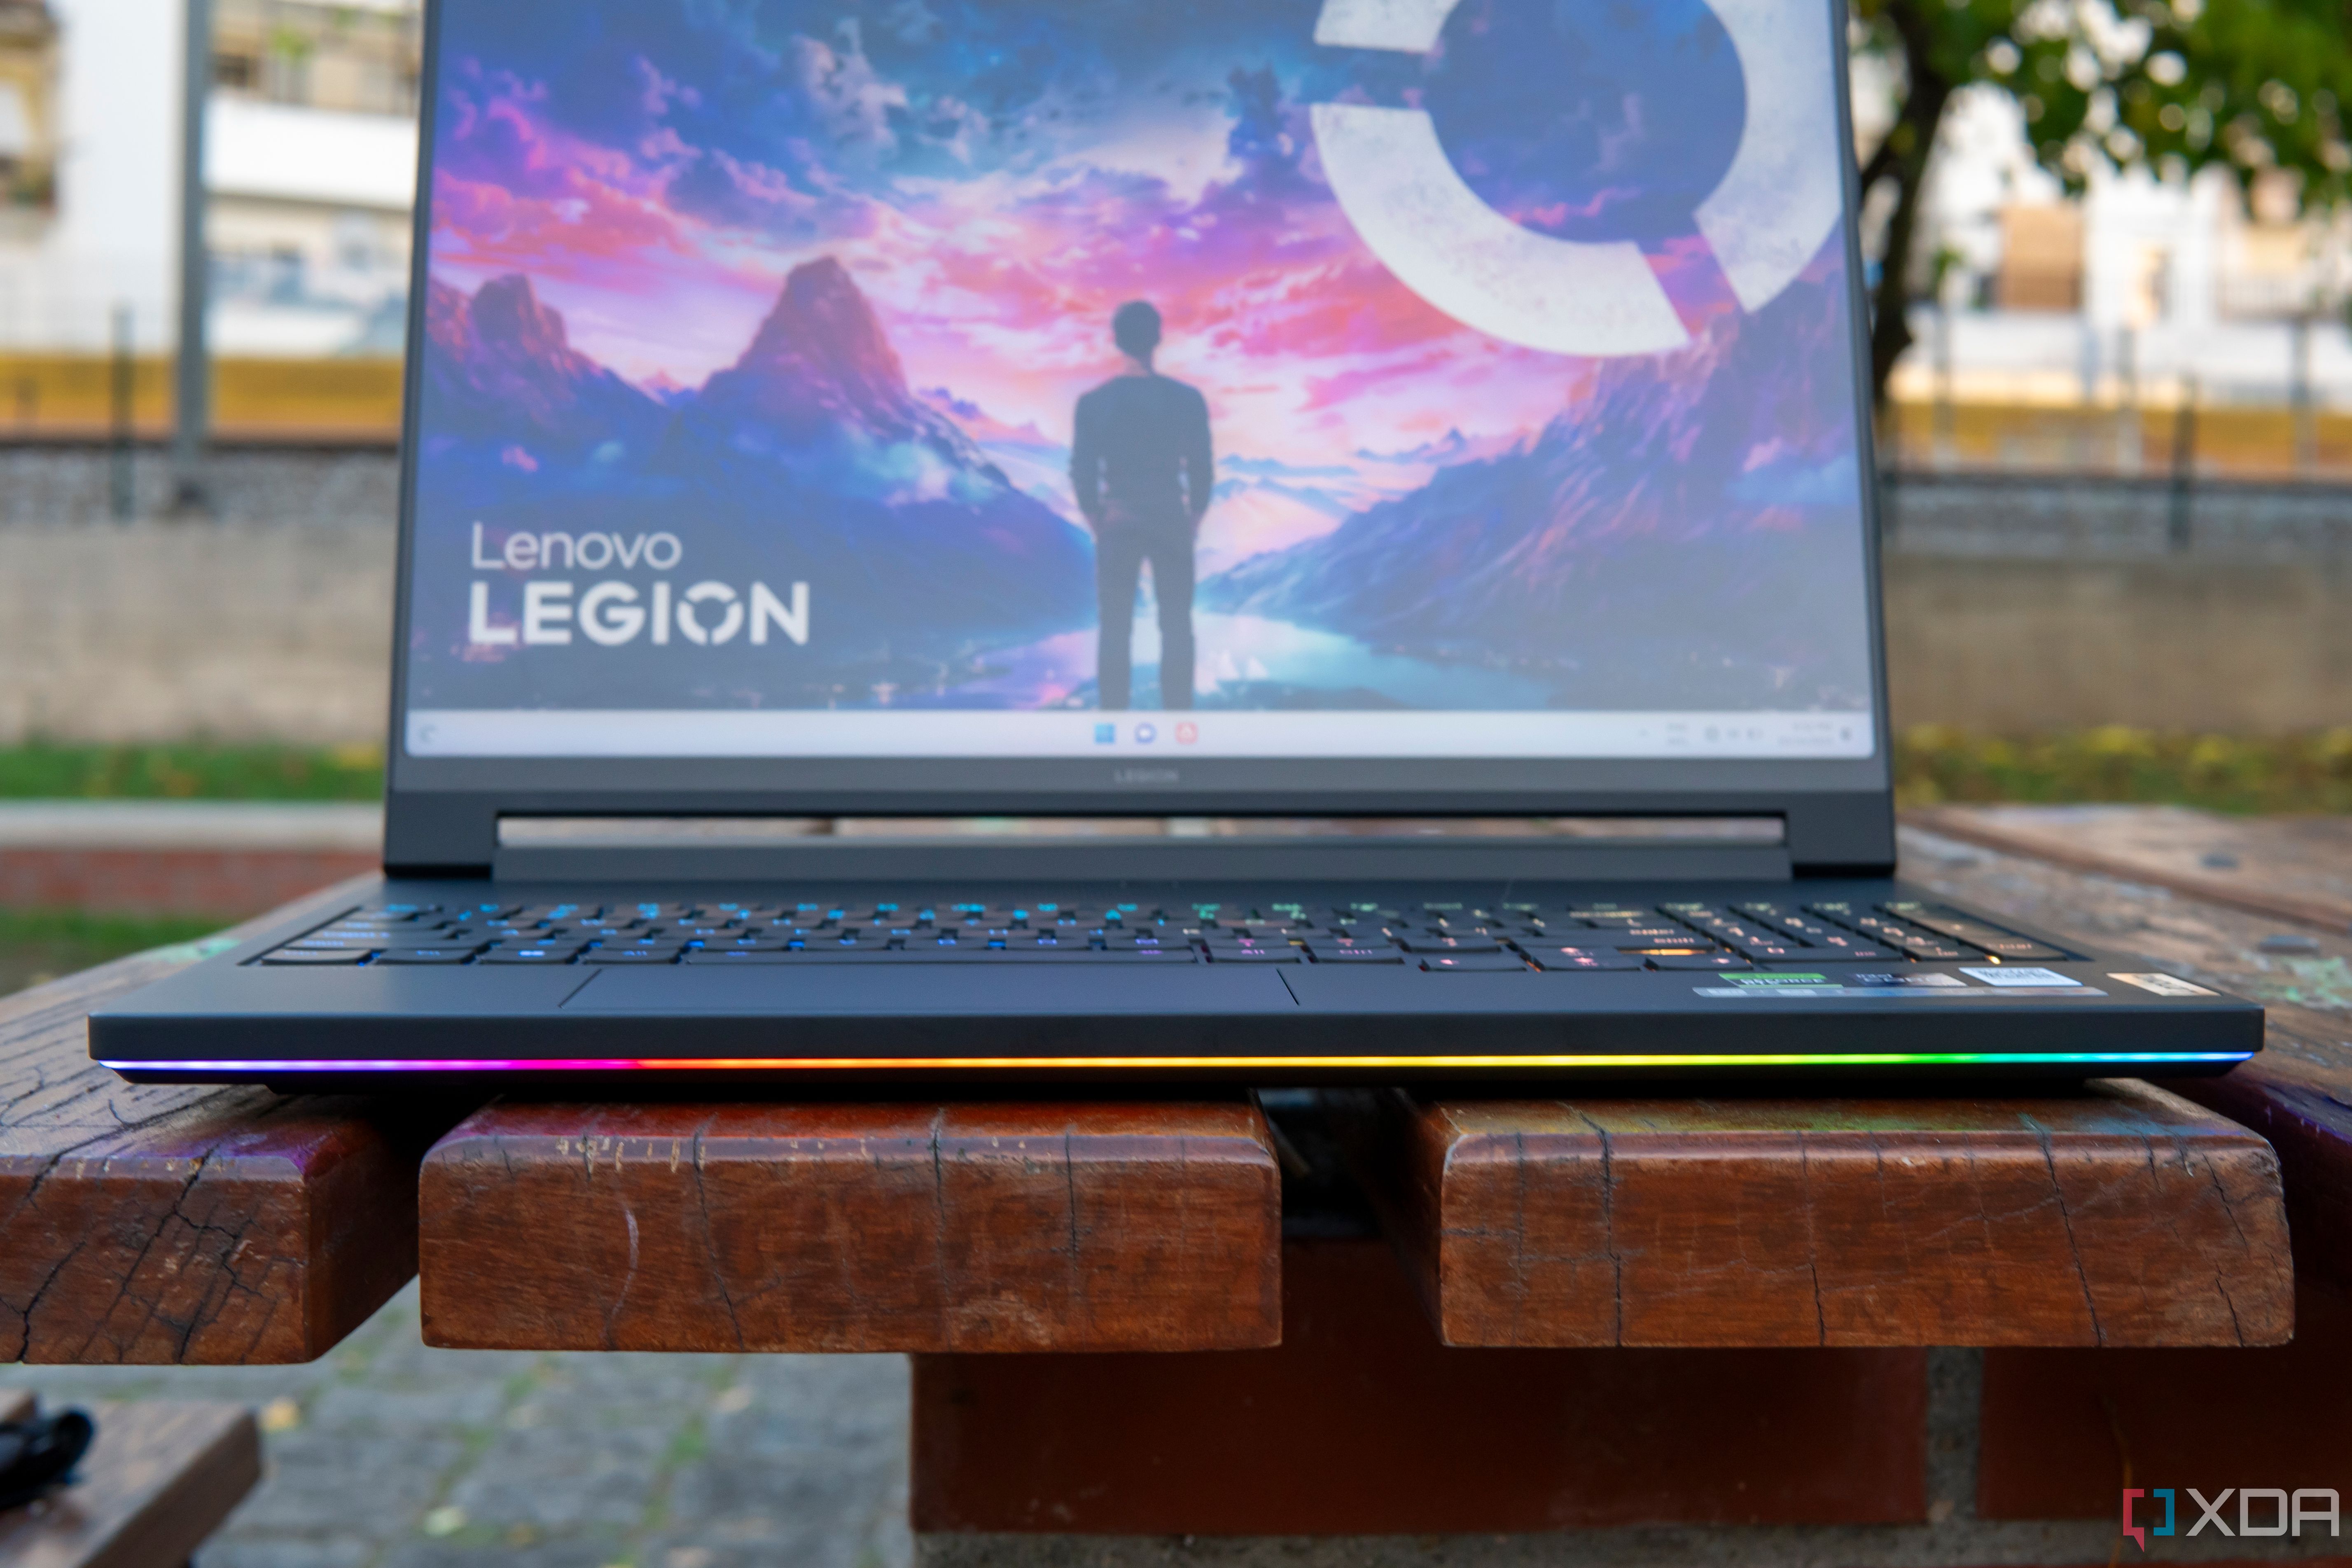 Close-up front view of the Lenovo Legion 9i, focused on the edge of the laptop